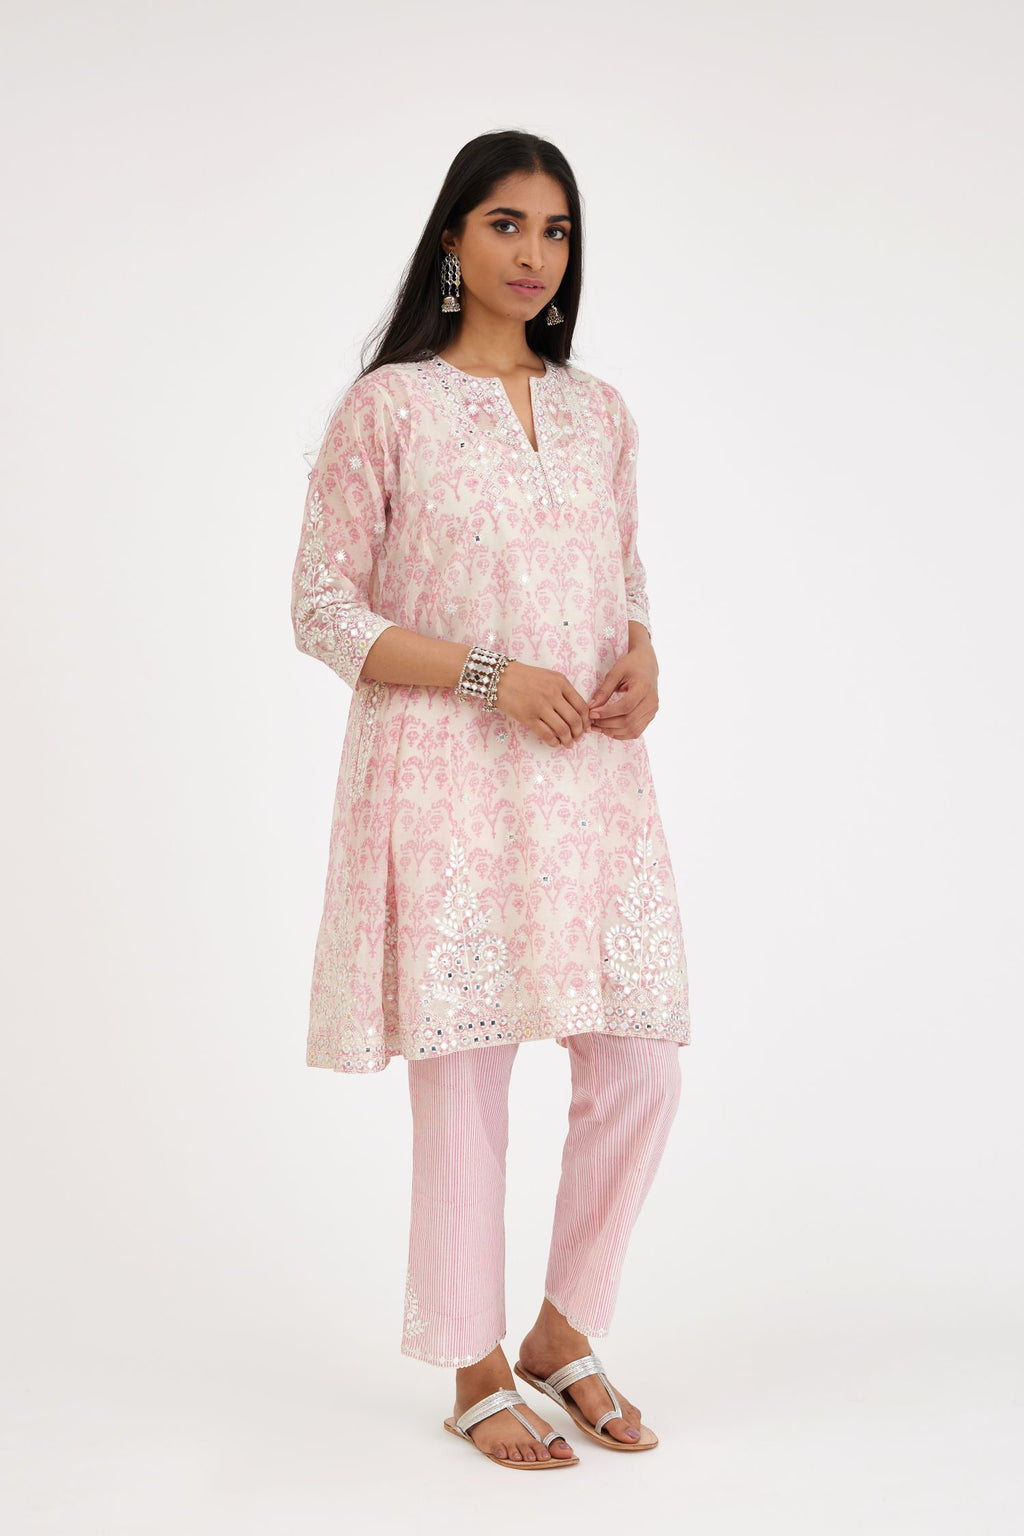 Ikat design pink and off white hand block-printed Cotton Chanderi short panelled kurta set with off-white thread and mirror embroidery..